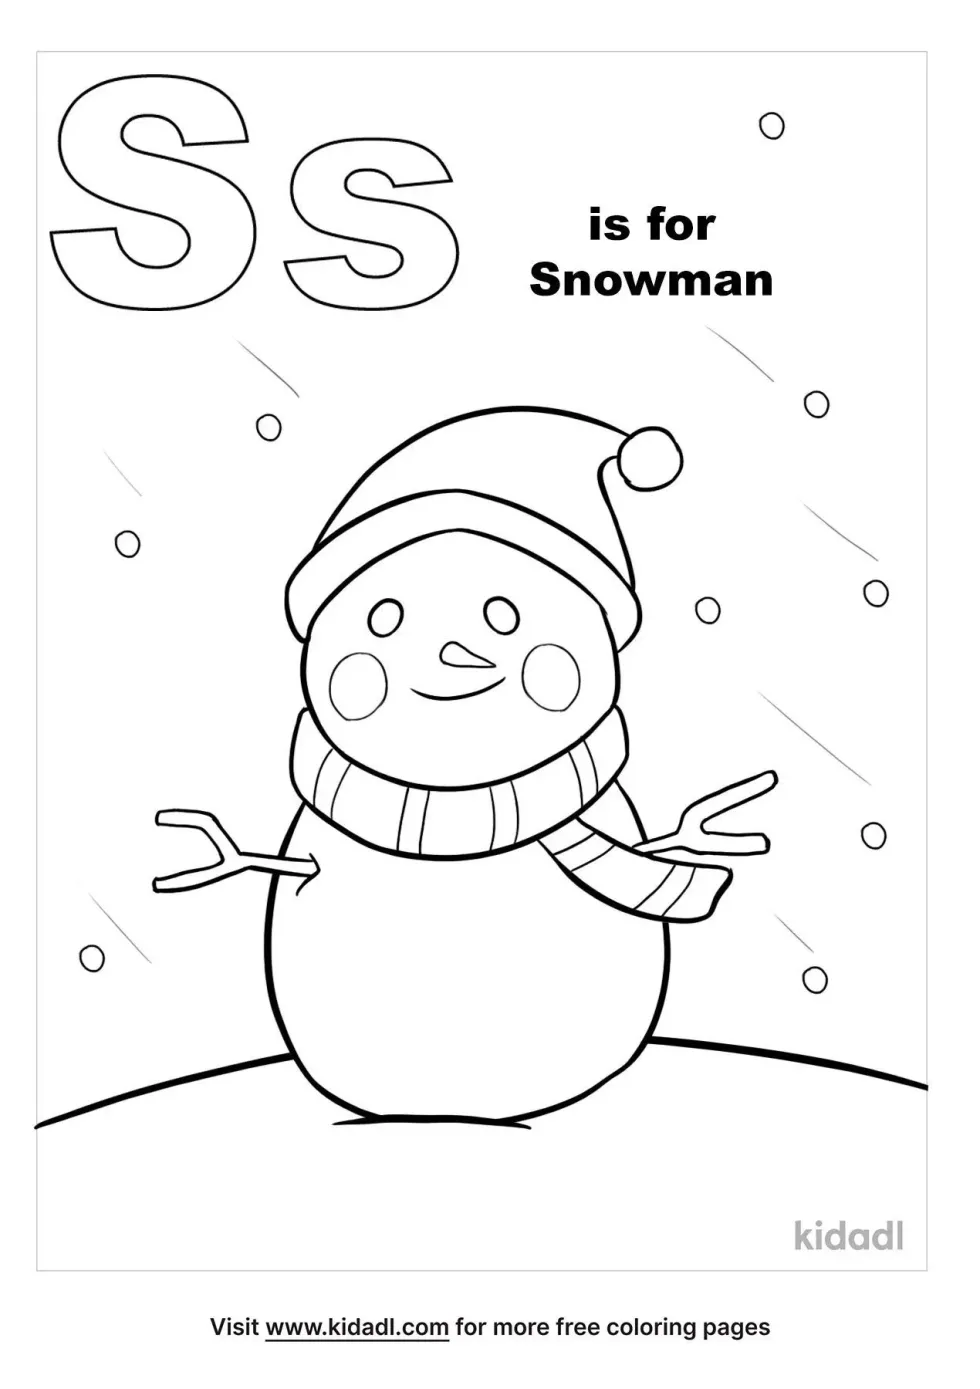 S Is For Snowman